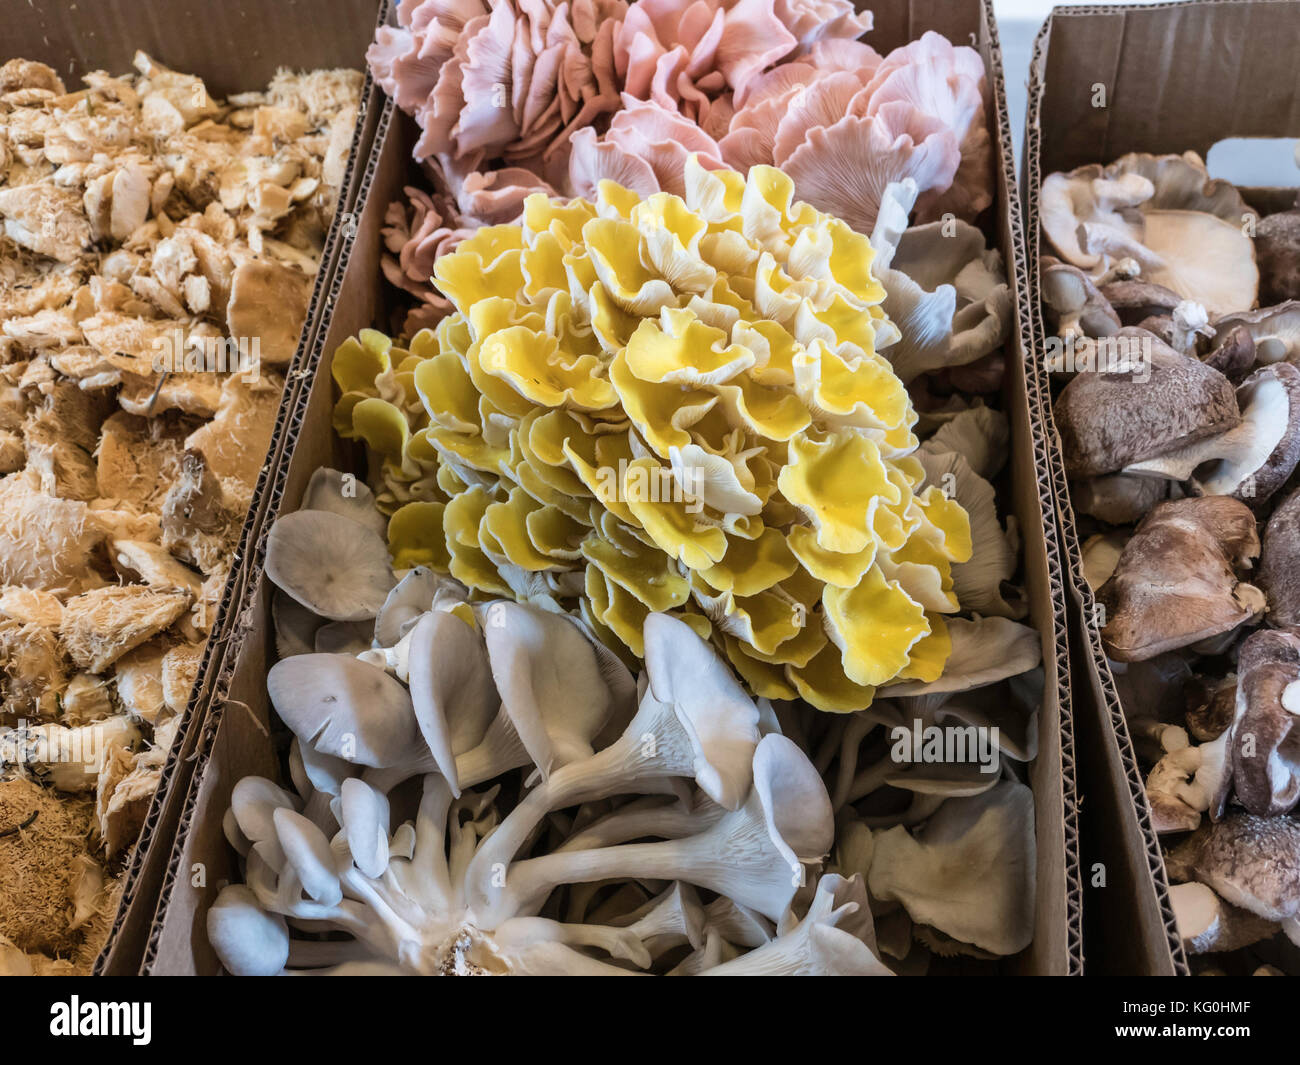 boxes full of colorful mushrooms at the market Stock Photo